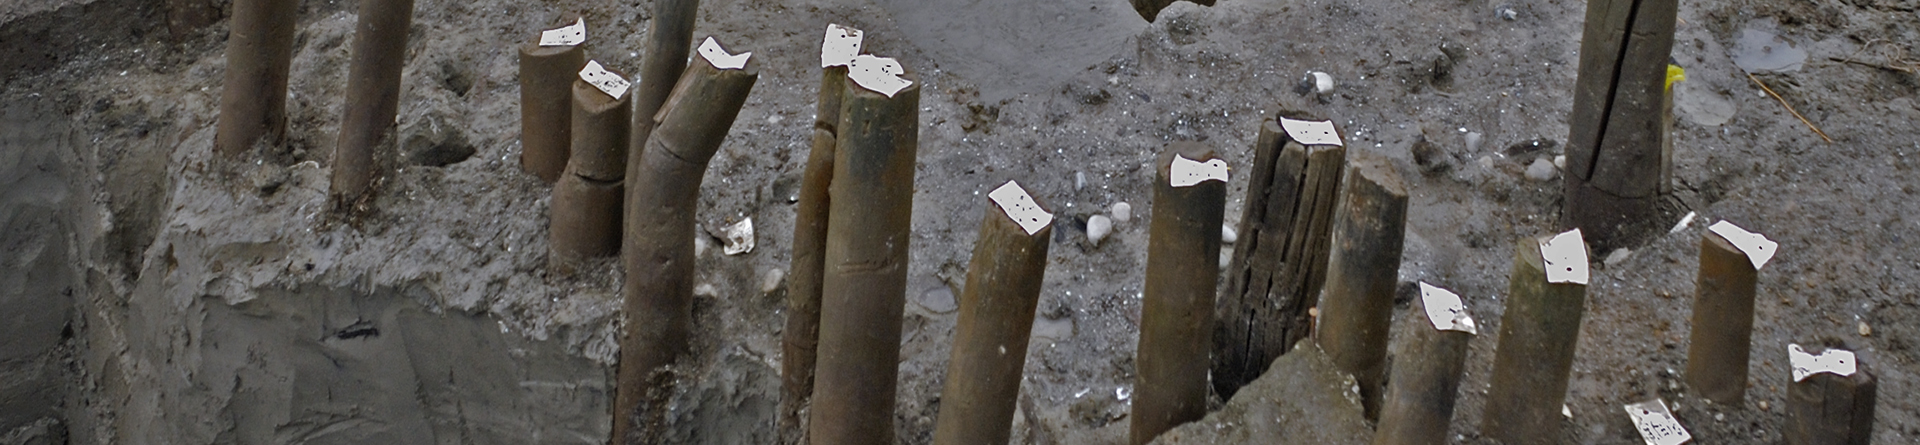 The wooden stakes of a prehistoric enclosure at Must Farm, Cambridgeshire, preserved by waterlogging.